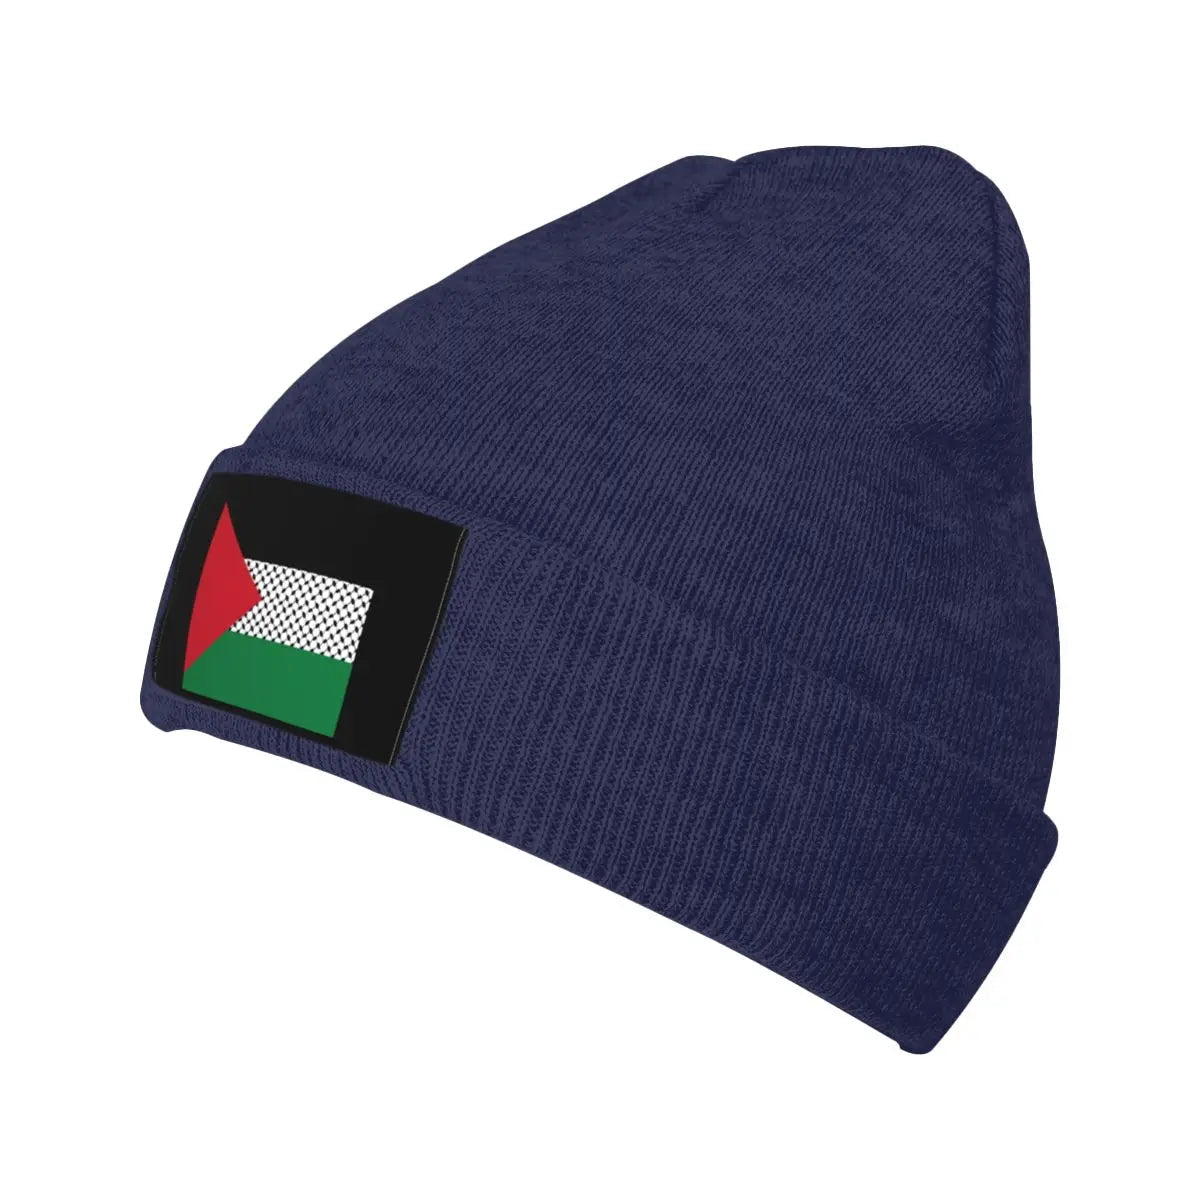 Palestine Flag Only Knitted Cap Stretchy Hat Warm Beanie for Men & Women (4 Colors) - www.DeeneeShop.com